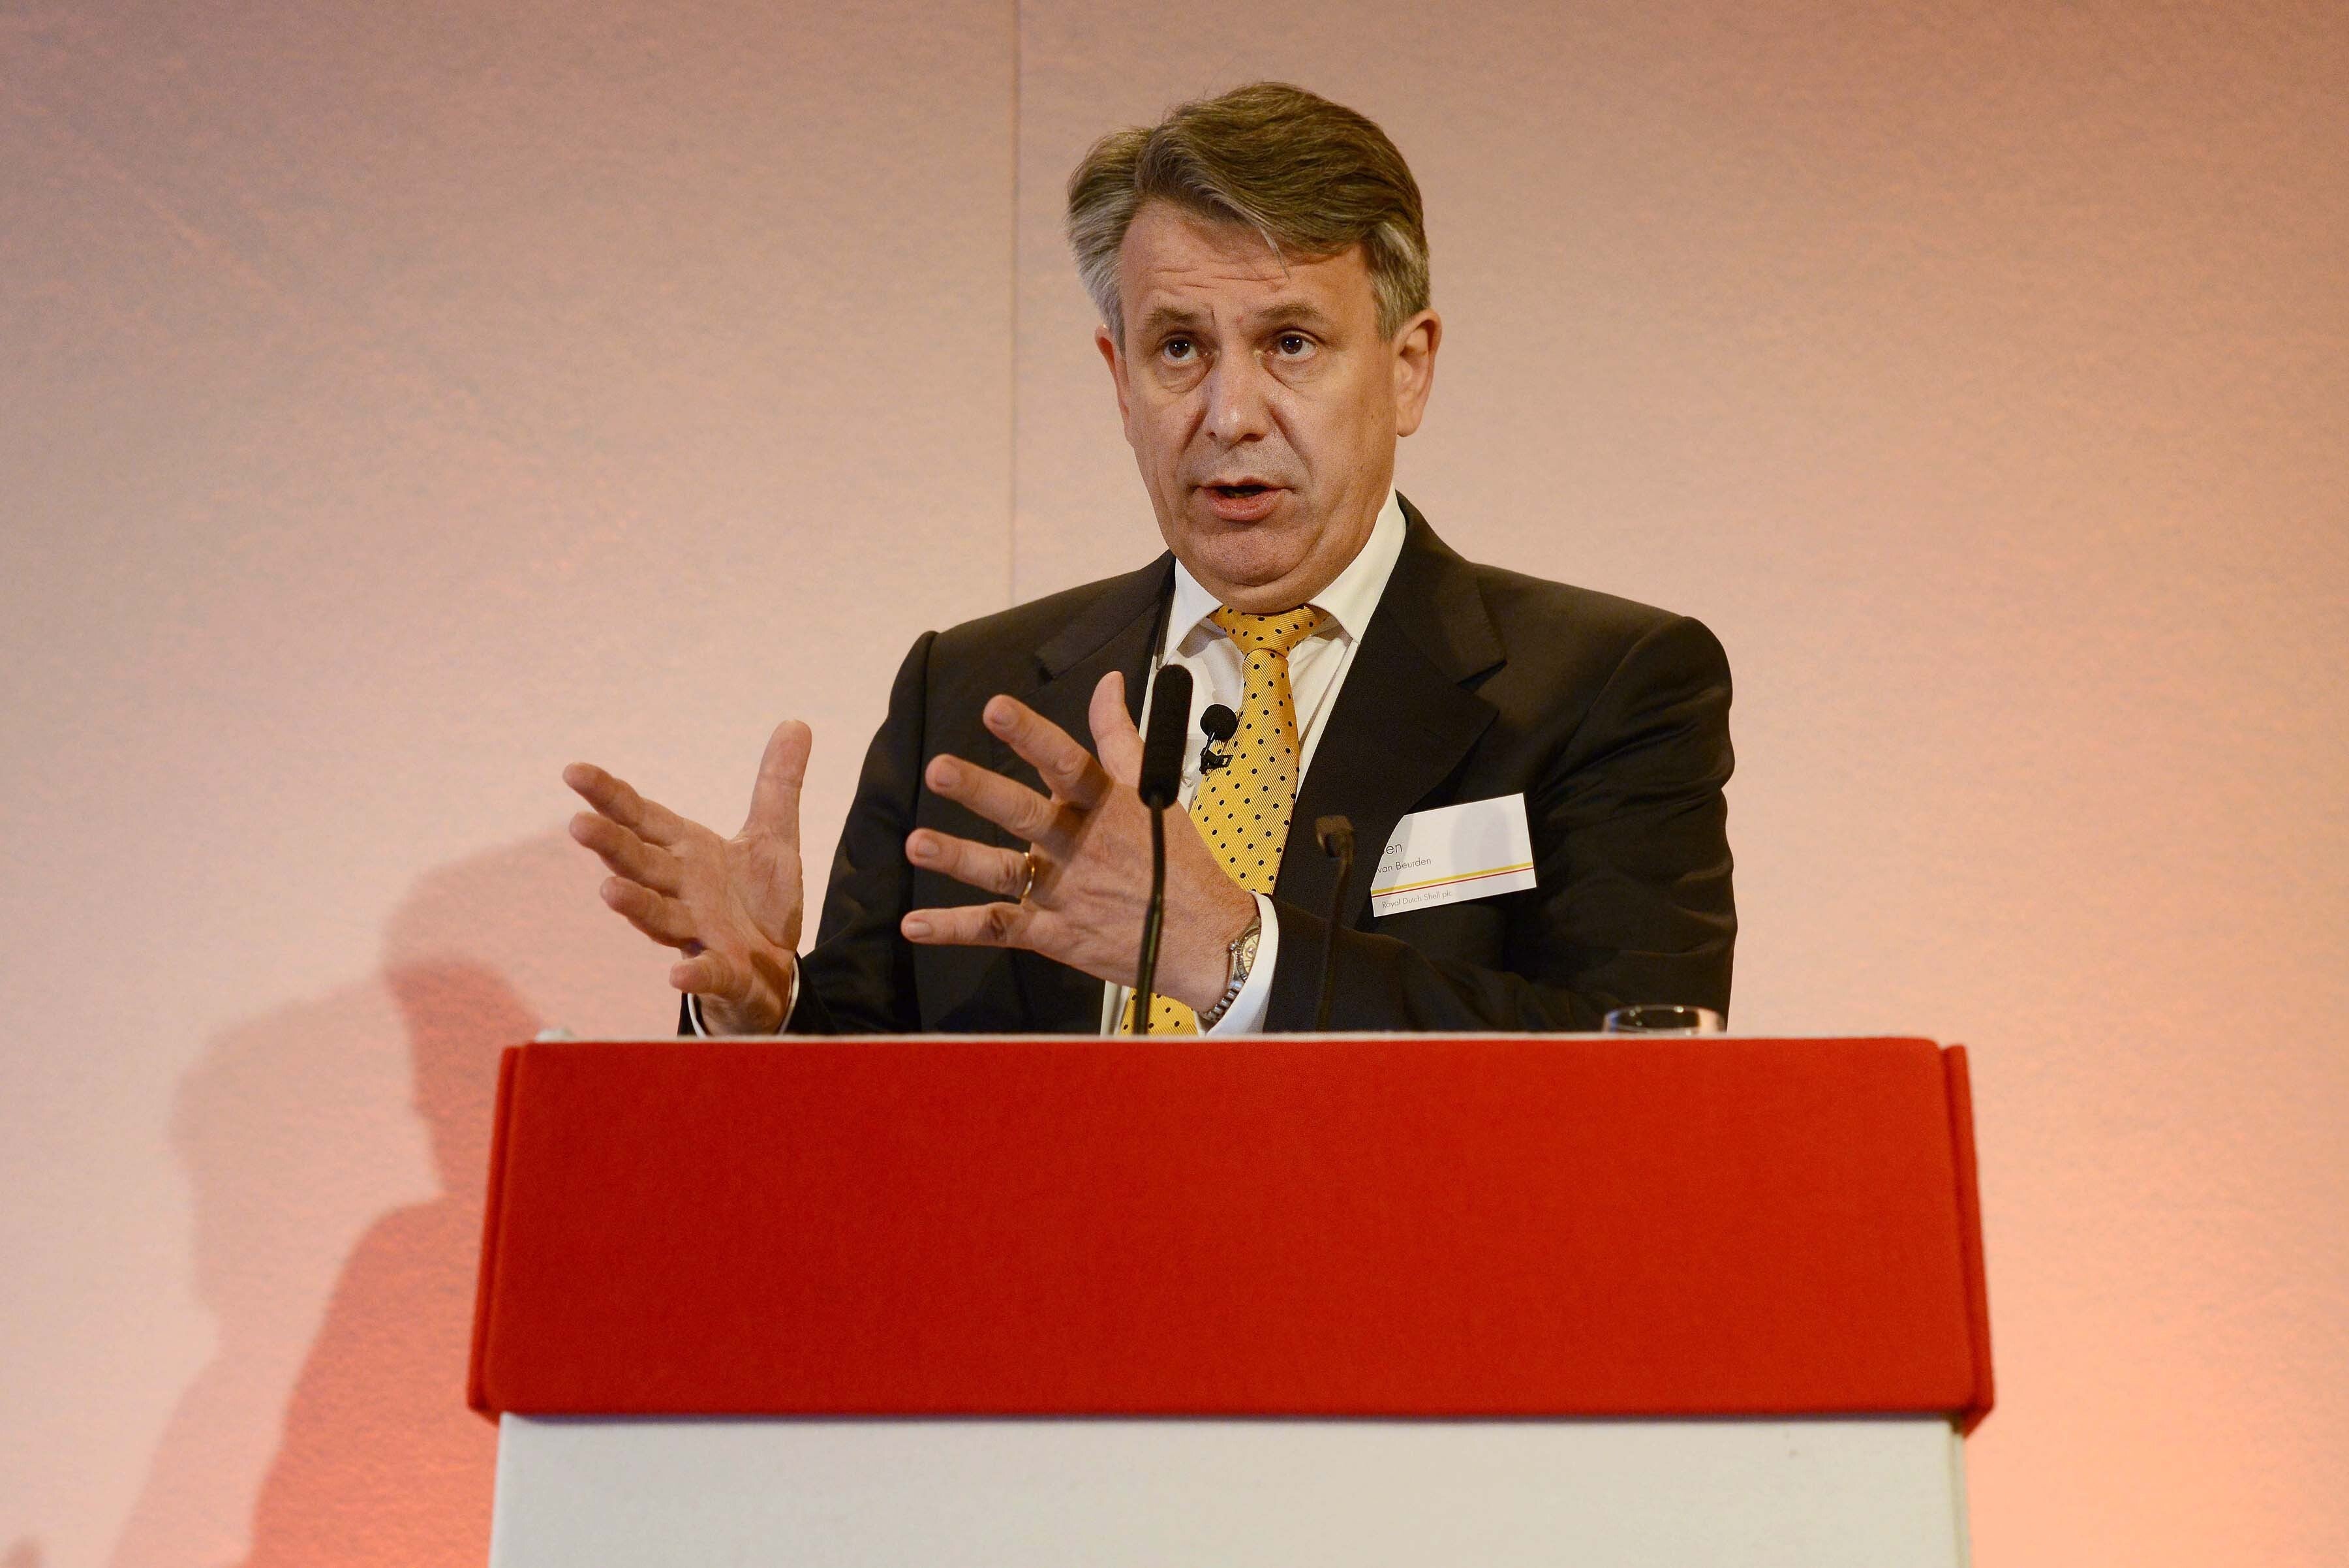 Shell boss Ben van Beurden said he wants Shell to lead society on decarbonisation (Daniel Lynch/Newscast/PA)